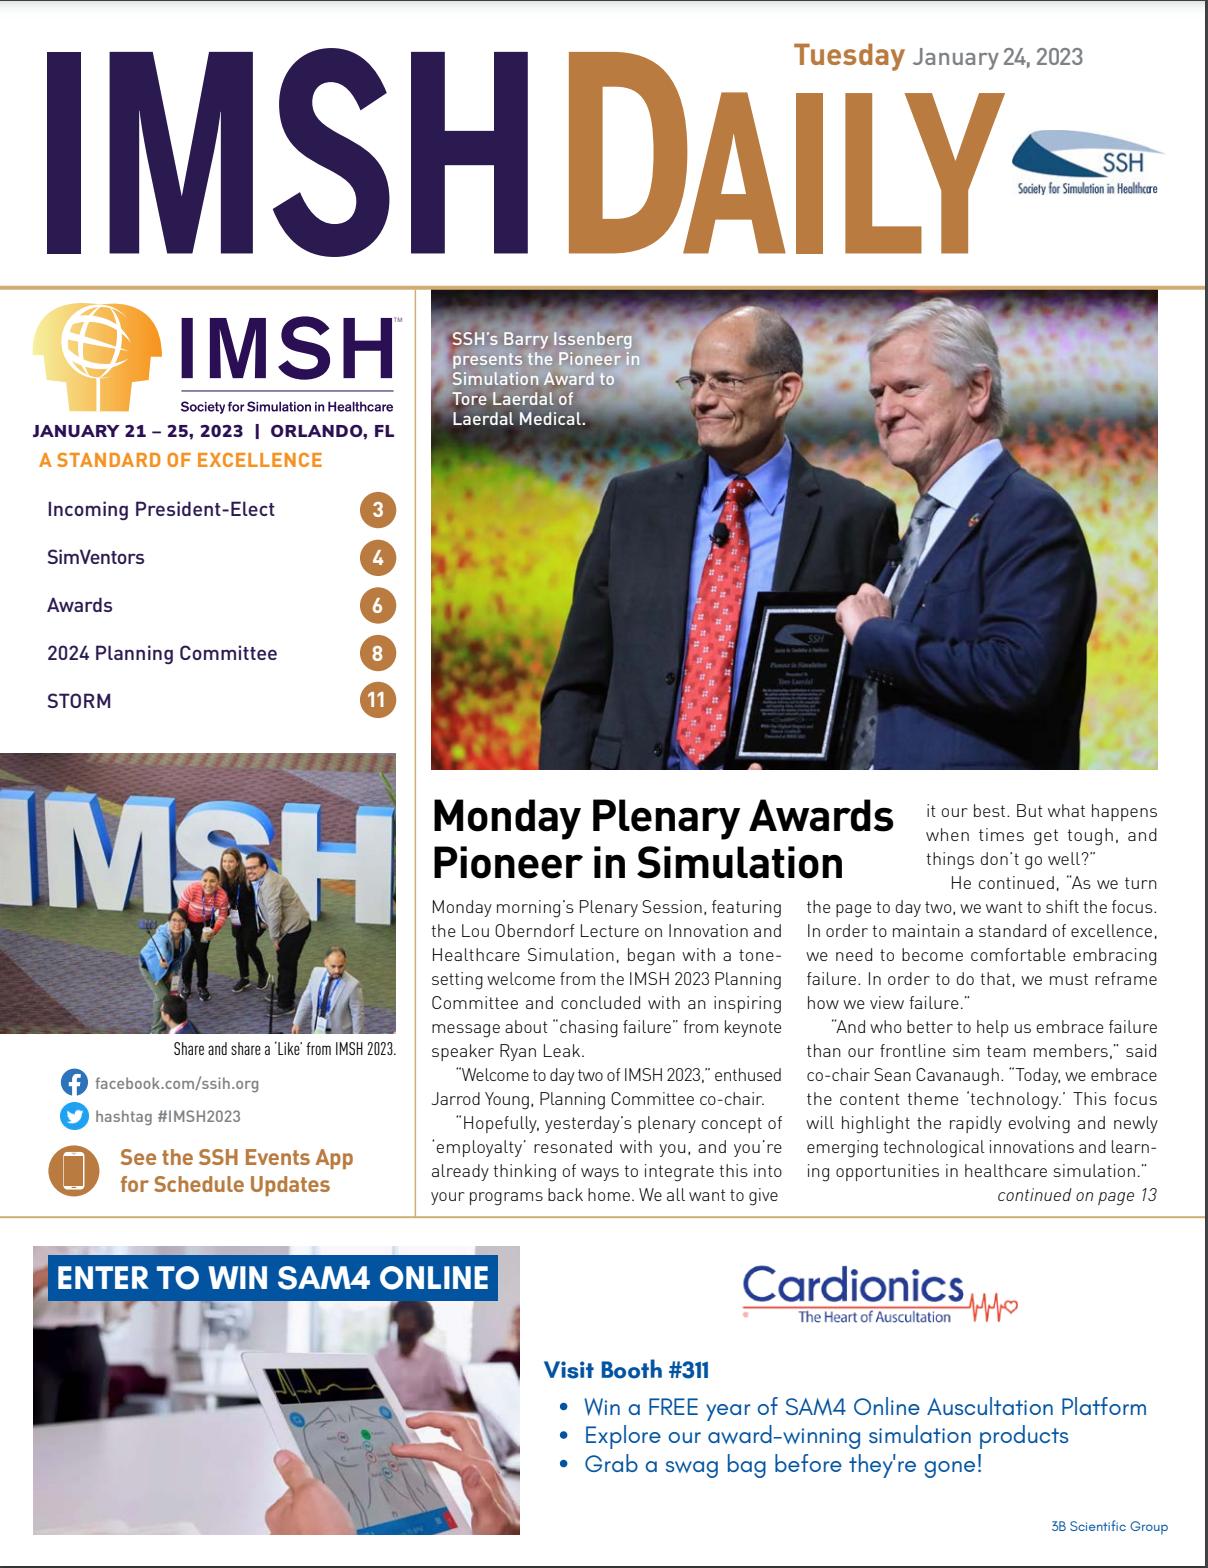 IMSH Daily Tuesday